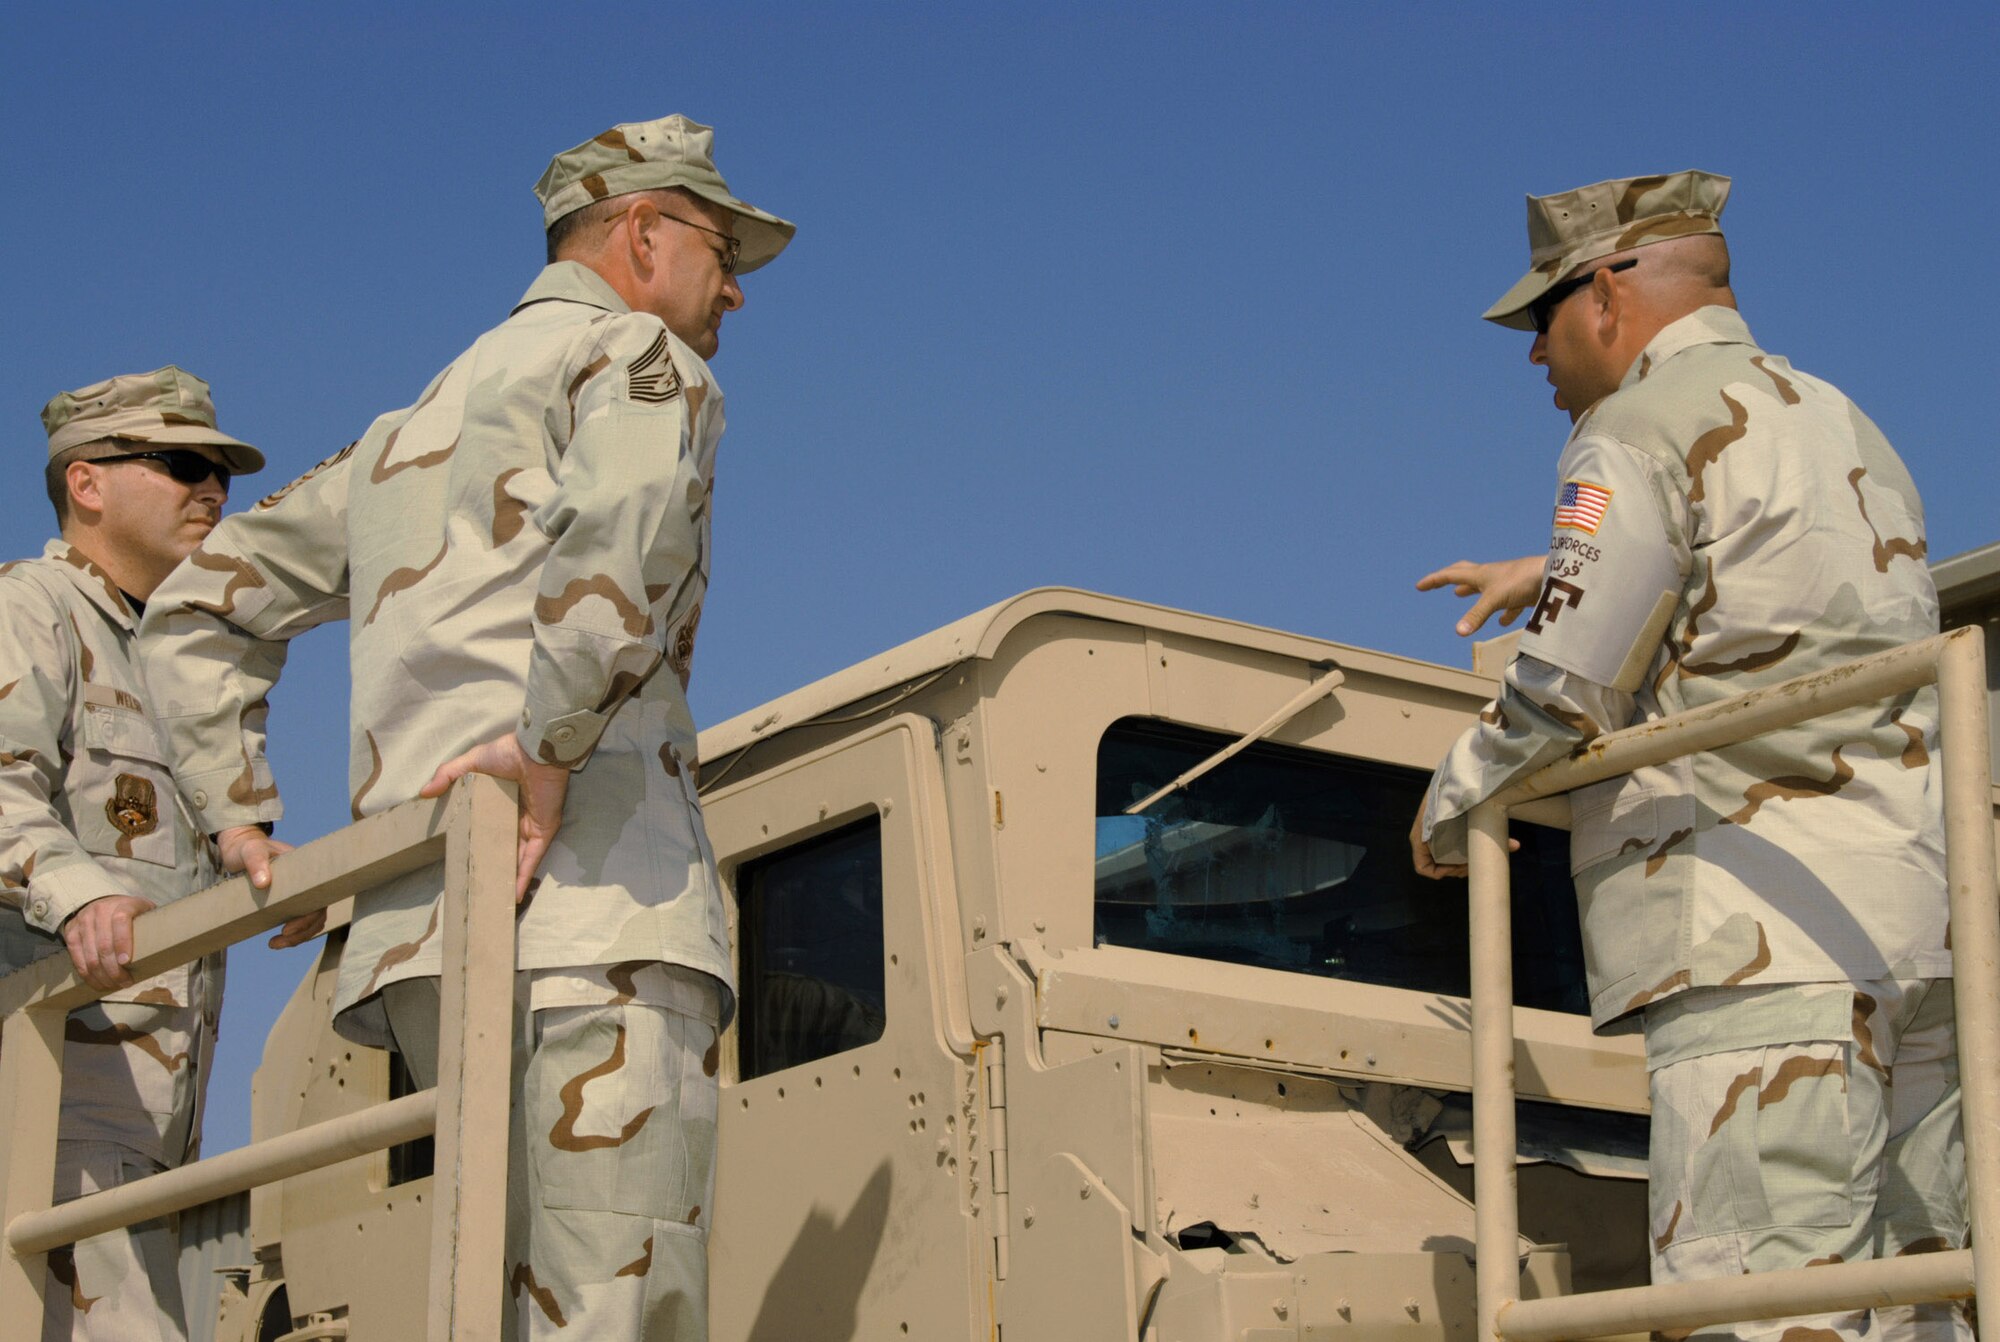 Tech. Sgt. Thomas Williamson (right) explains the rollover Humvee simulator to several members of the 379th Air Expeditionary Wing.  The simulator, located at an Army camp in Southwest Asia, is used for egress assistance training to help Airmen learn how to escape from an inverted Humvee and increase their chance of survival after a catastrophic event. (U.S. Air Force photo/Staff Sgt. Doug Olsen)